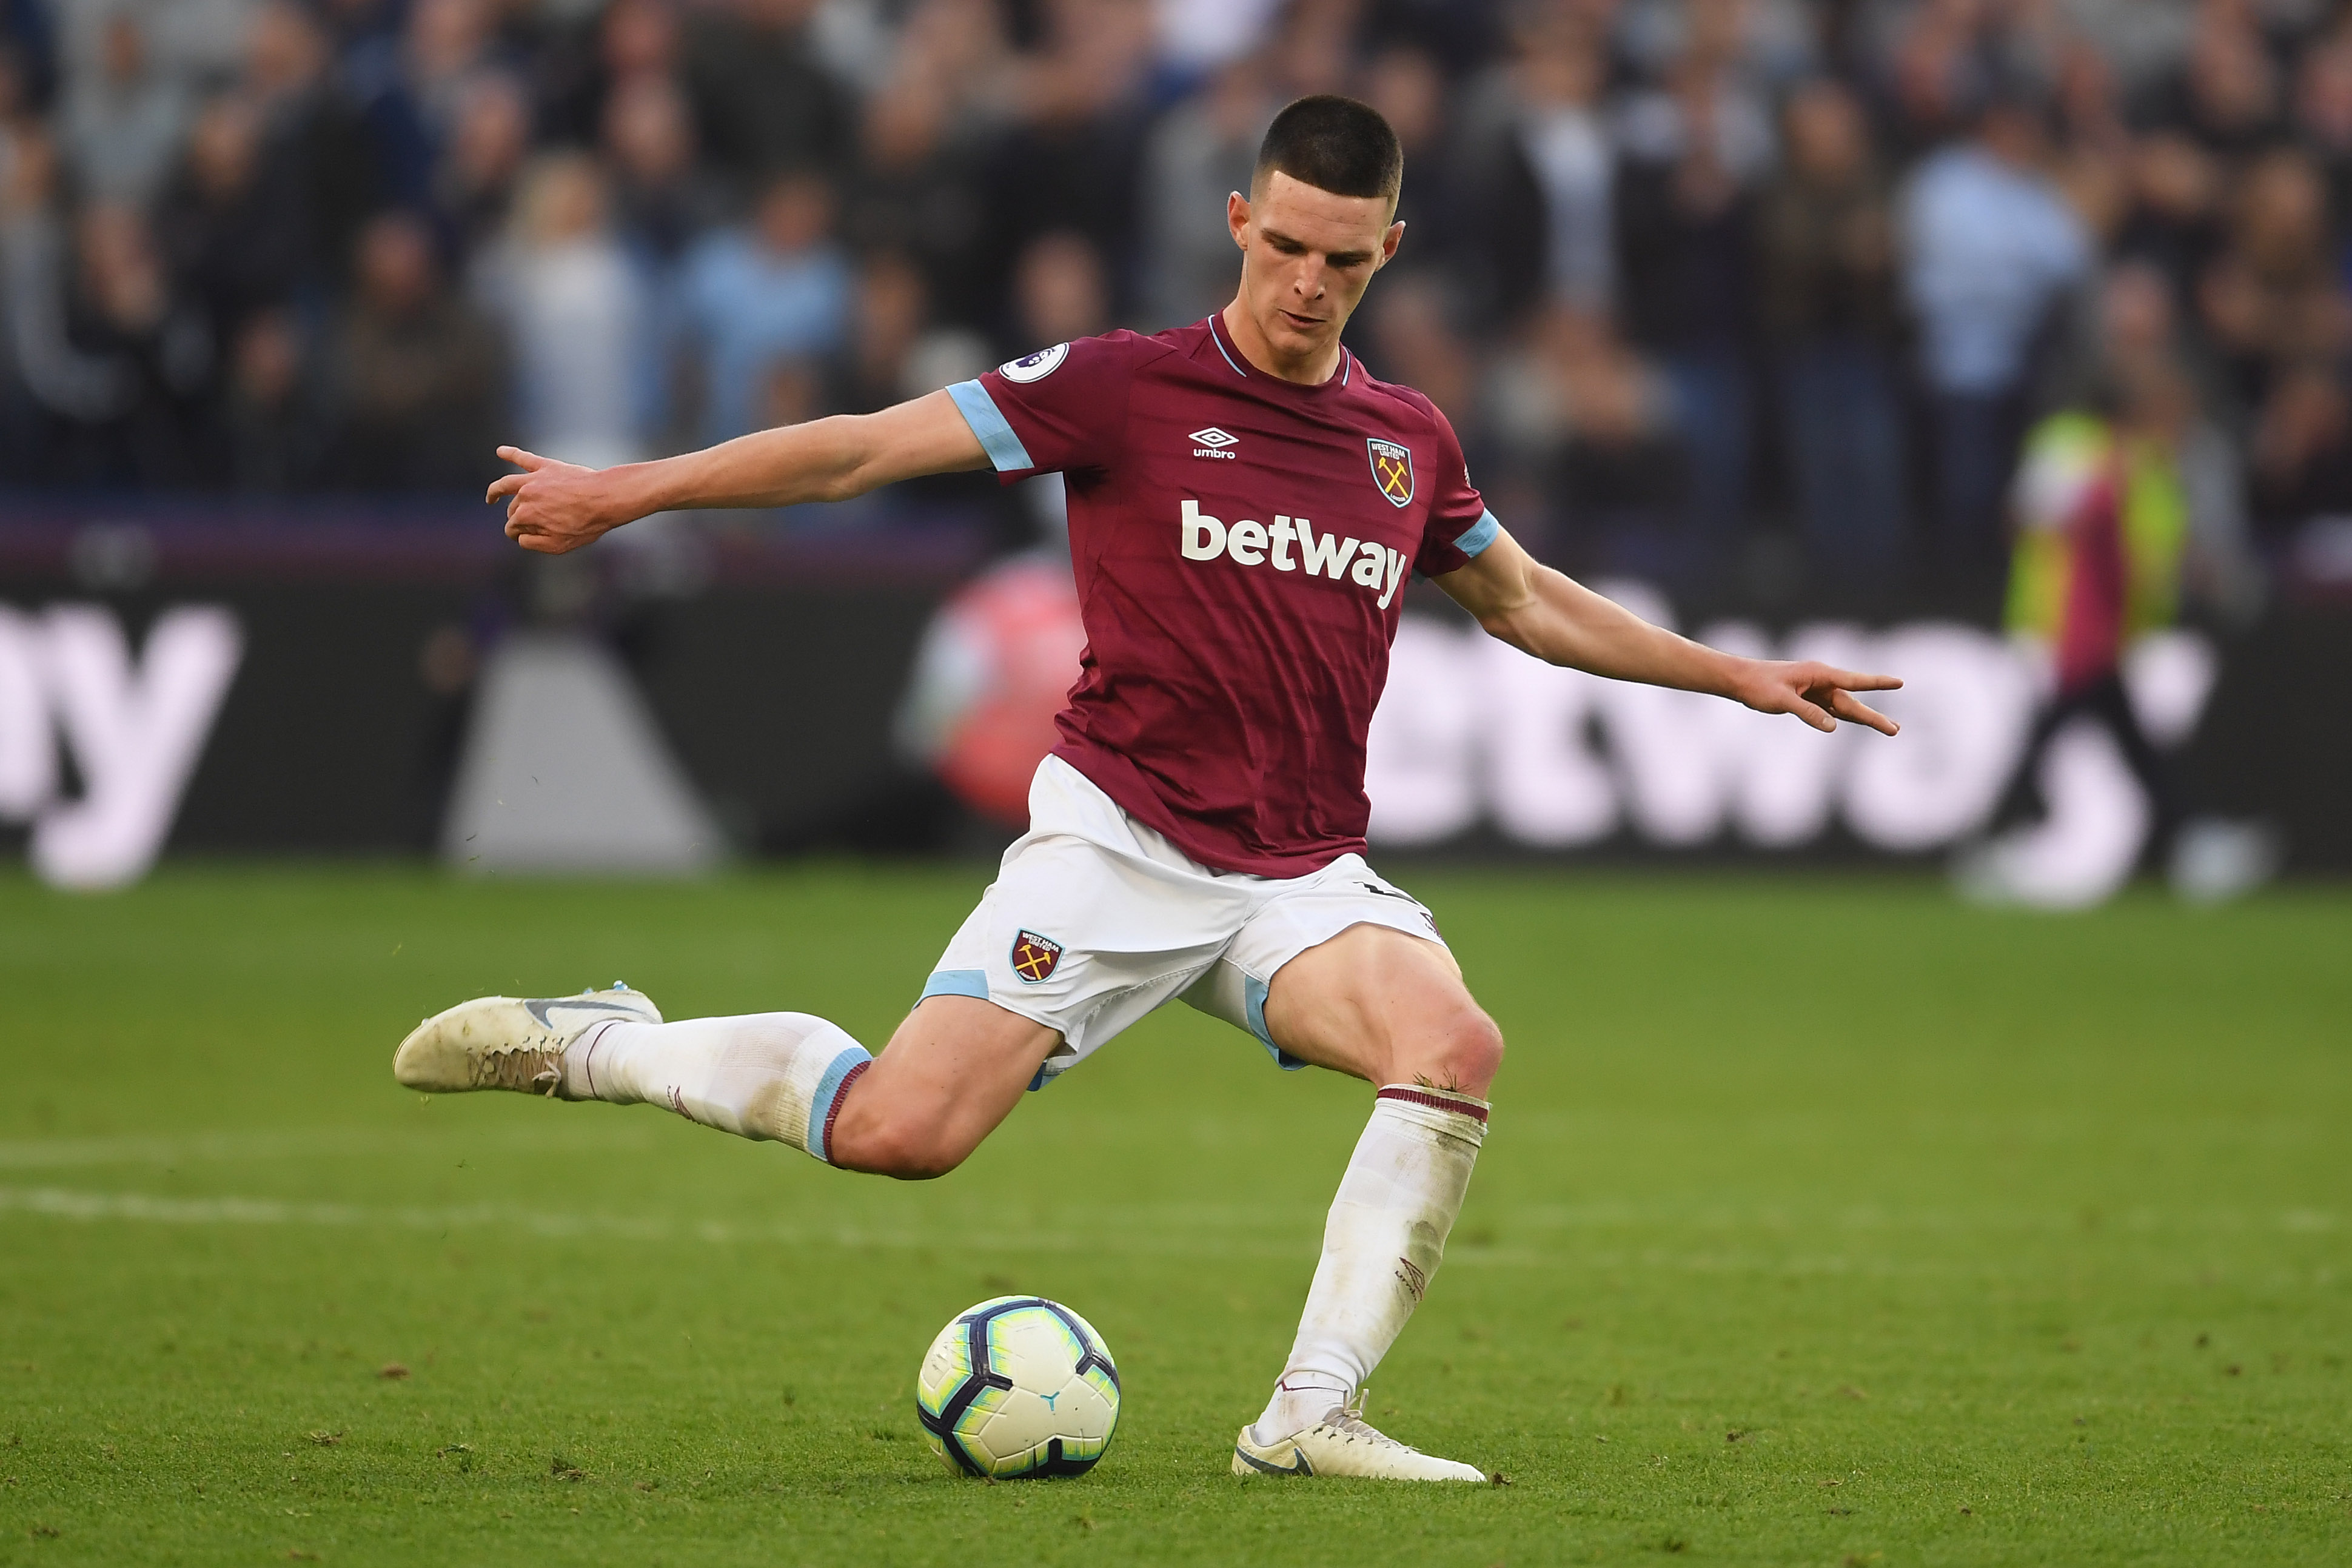 LONDON, ENGLAND - OCTOBER 20:  Declan Rice of West Ham United in action during the Premier League match between West Ham United and Tottenham Hotspur at London Stadium on October 20, 2018 in London, United Kingdom.  (Photo by Mike Hewitt/Getty Images)